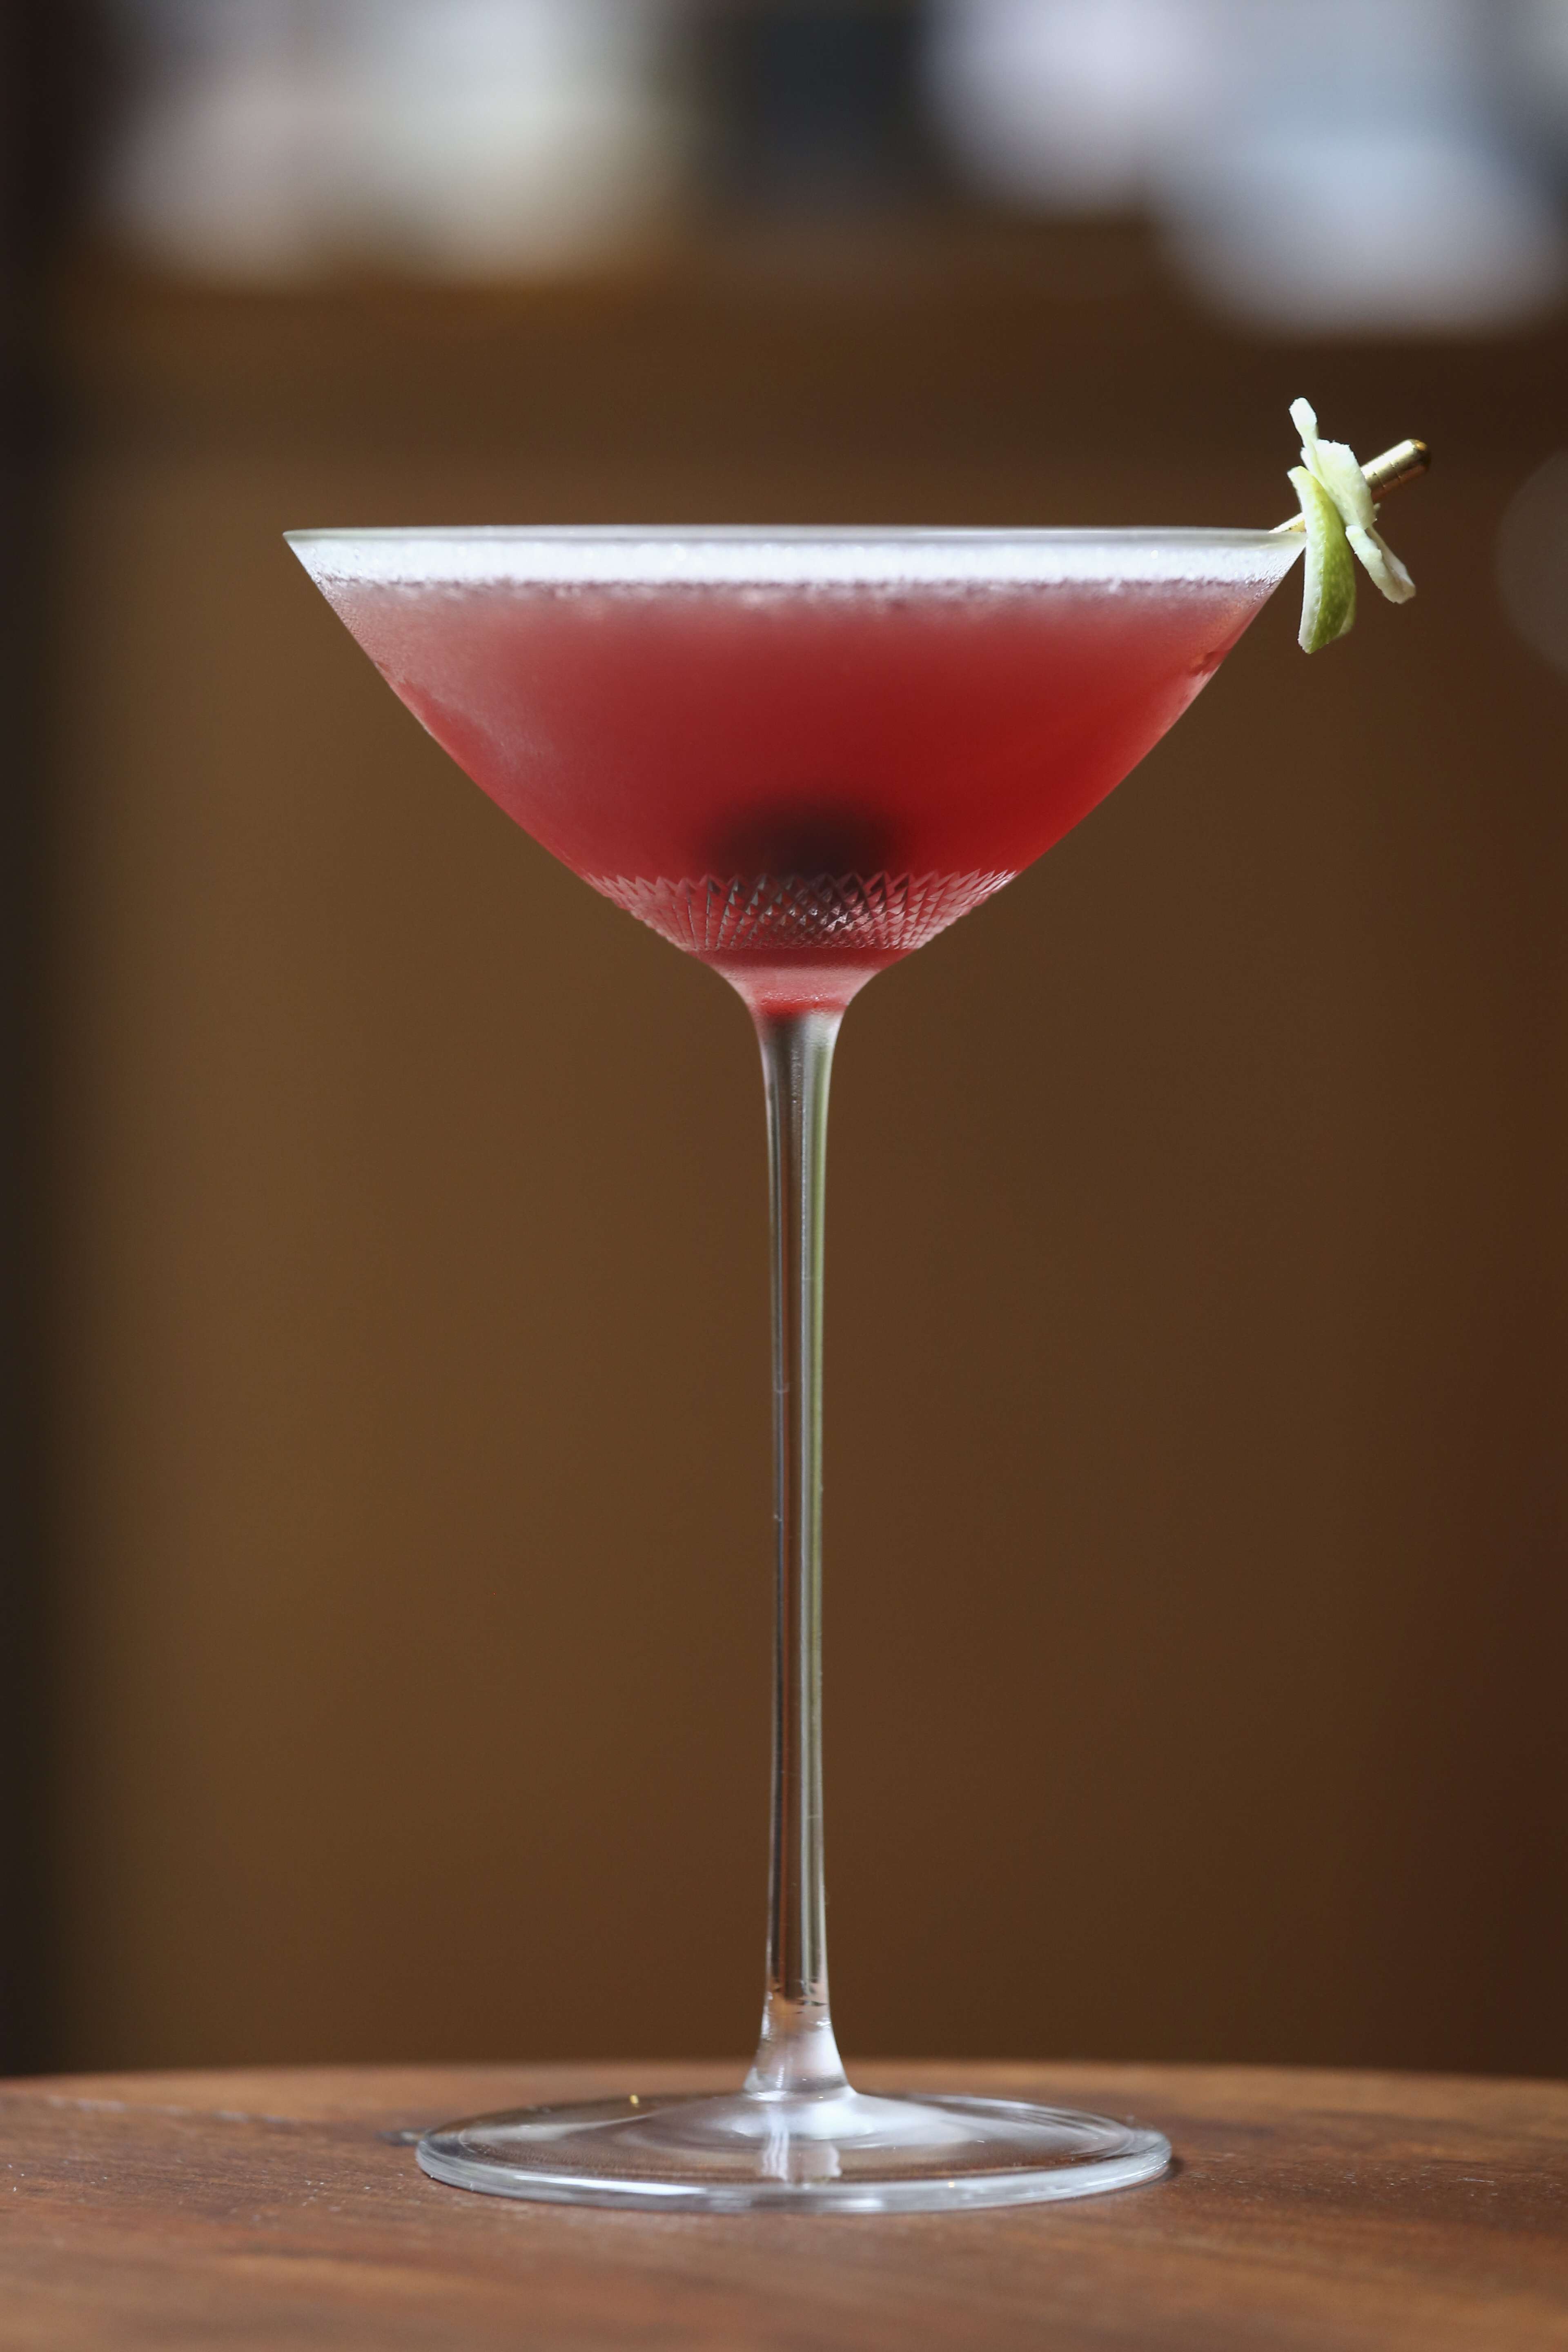 Make your own cocktail with the latest tips from apps and websites. Photo: Jonathan Wong